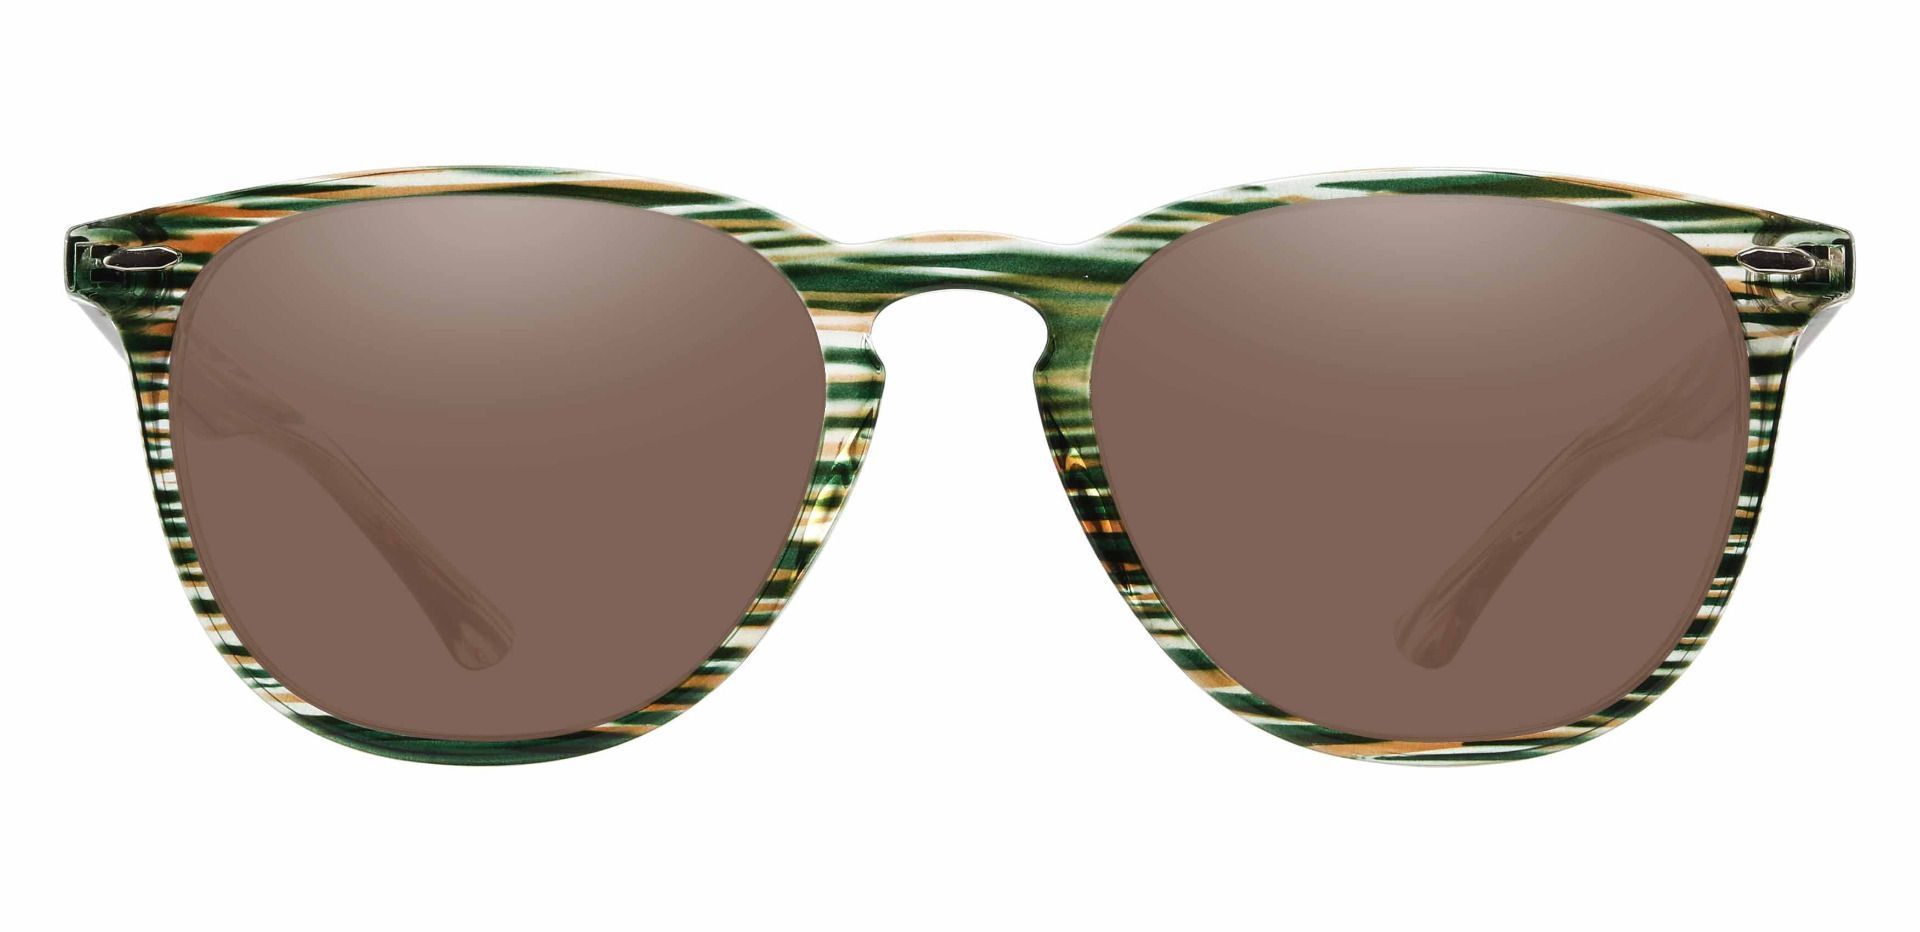 Sycamore Oval Non-Rx Sunglasses - Green Frame With Brown Lenses